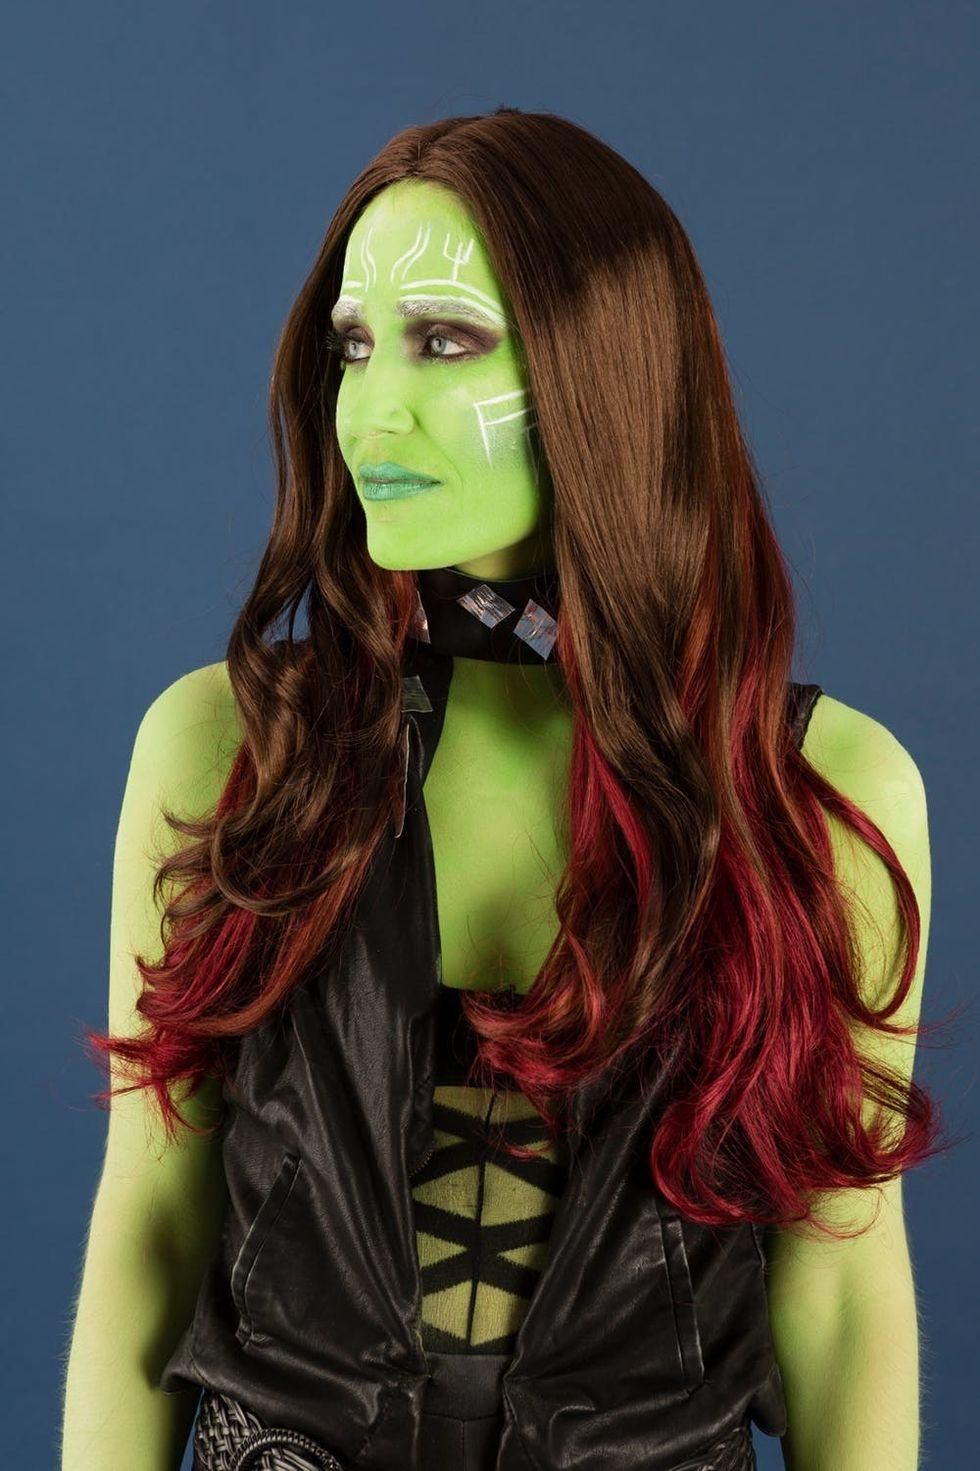 Gamora from Guardians of the Galaxy